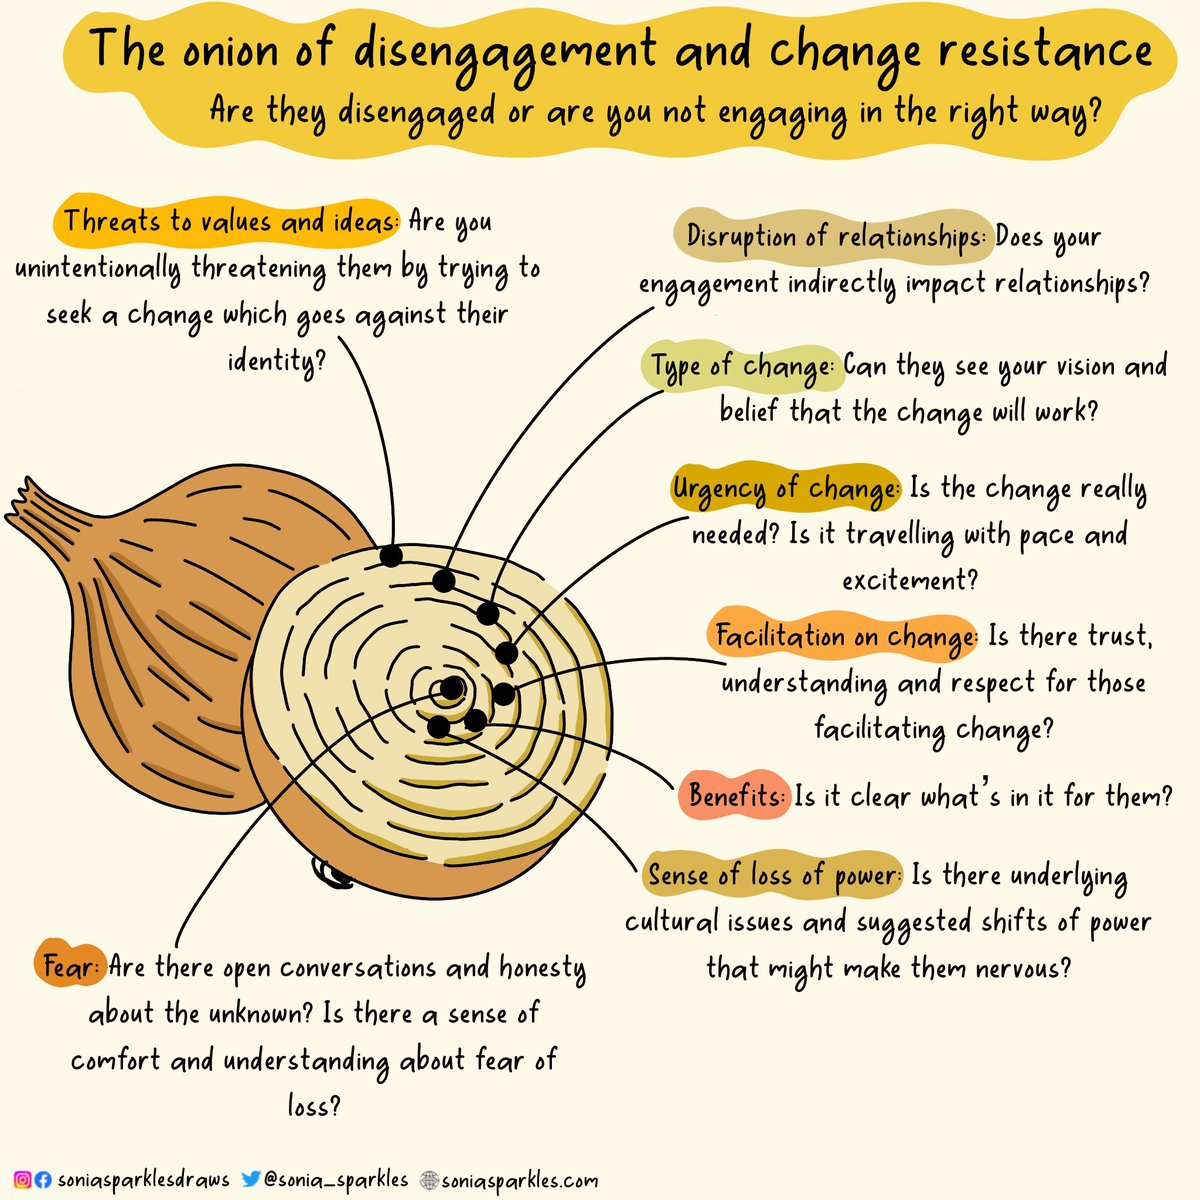 Todays doodle: The onion of disengagement. If you peel back the layers, you might find it’s your engagement style that needs changing 🧅